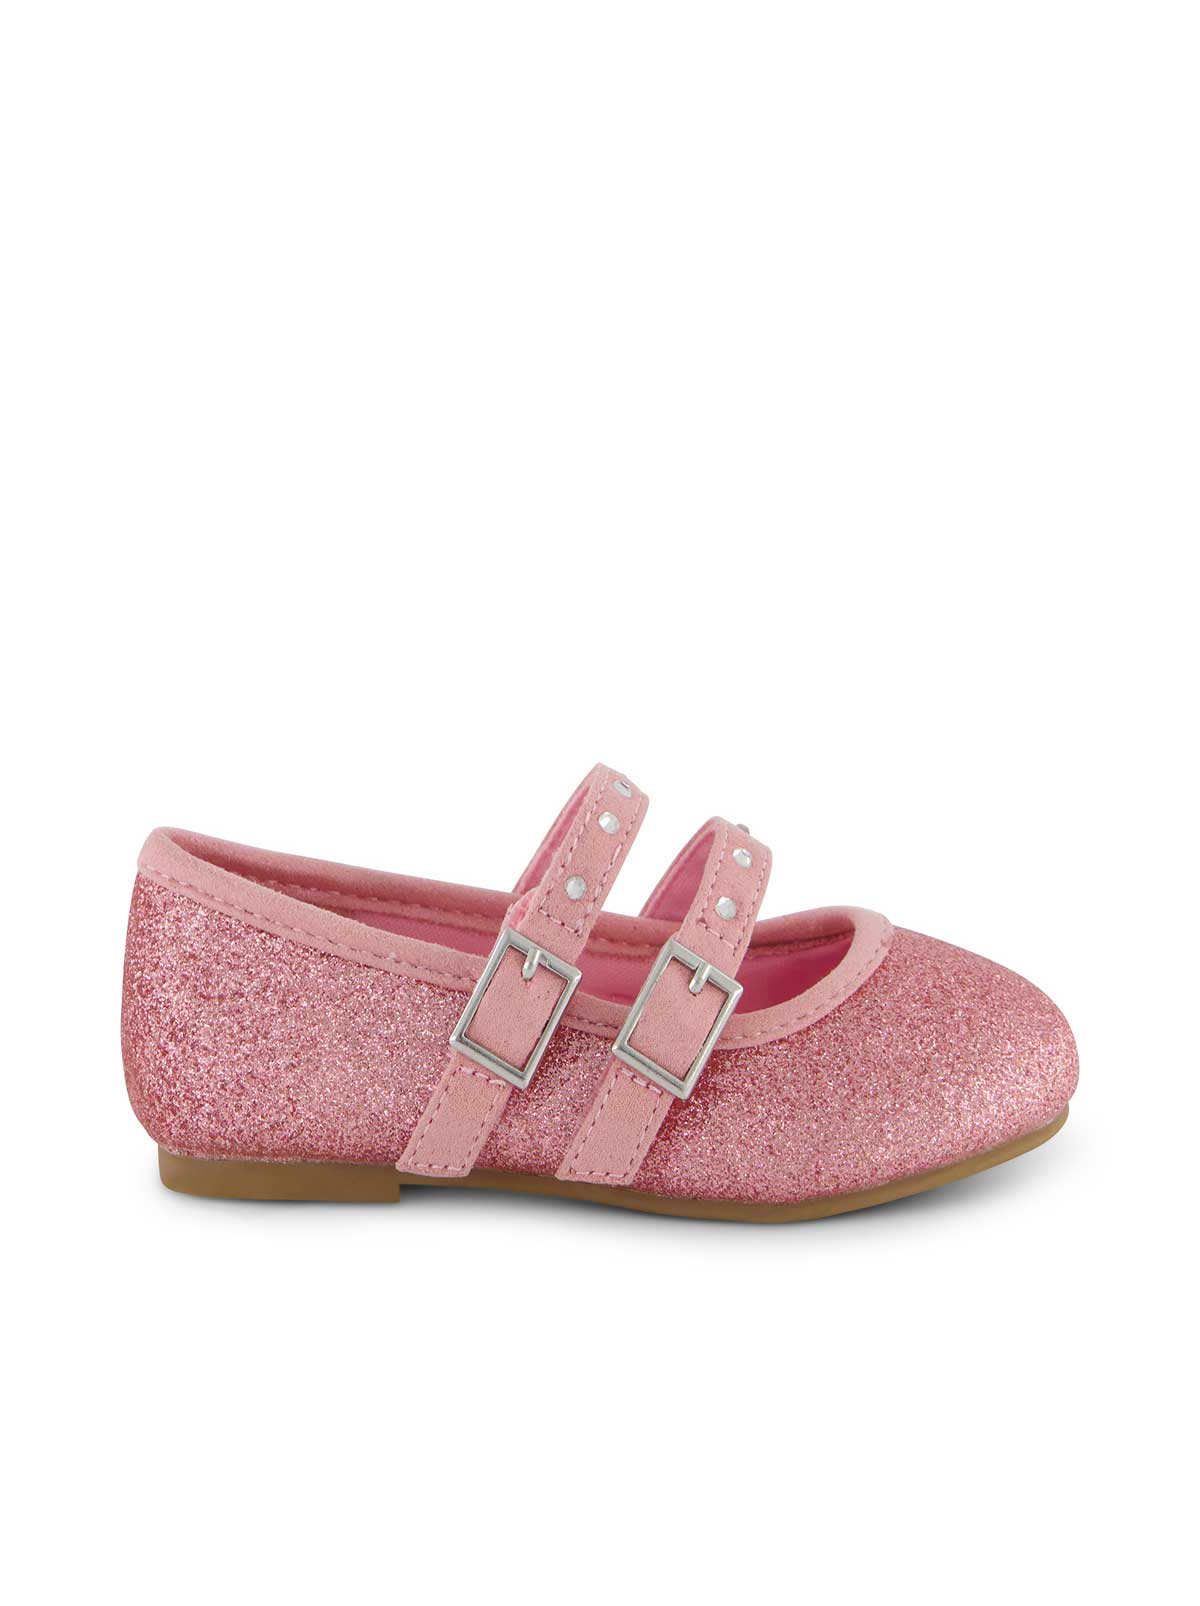 Image of Toddler Amy Double Strap Ballet Flat in Pink